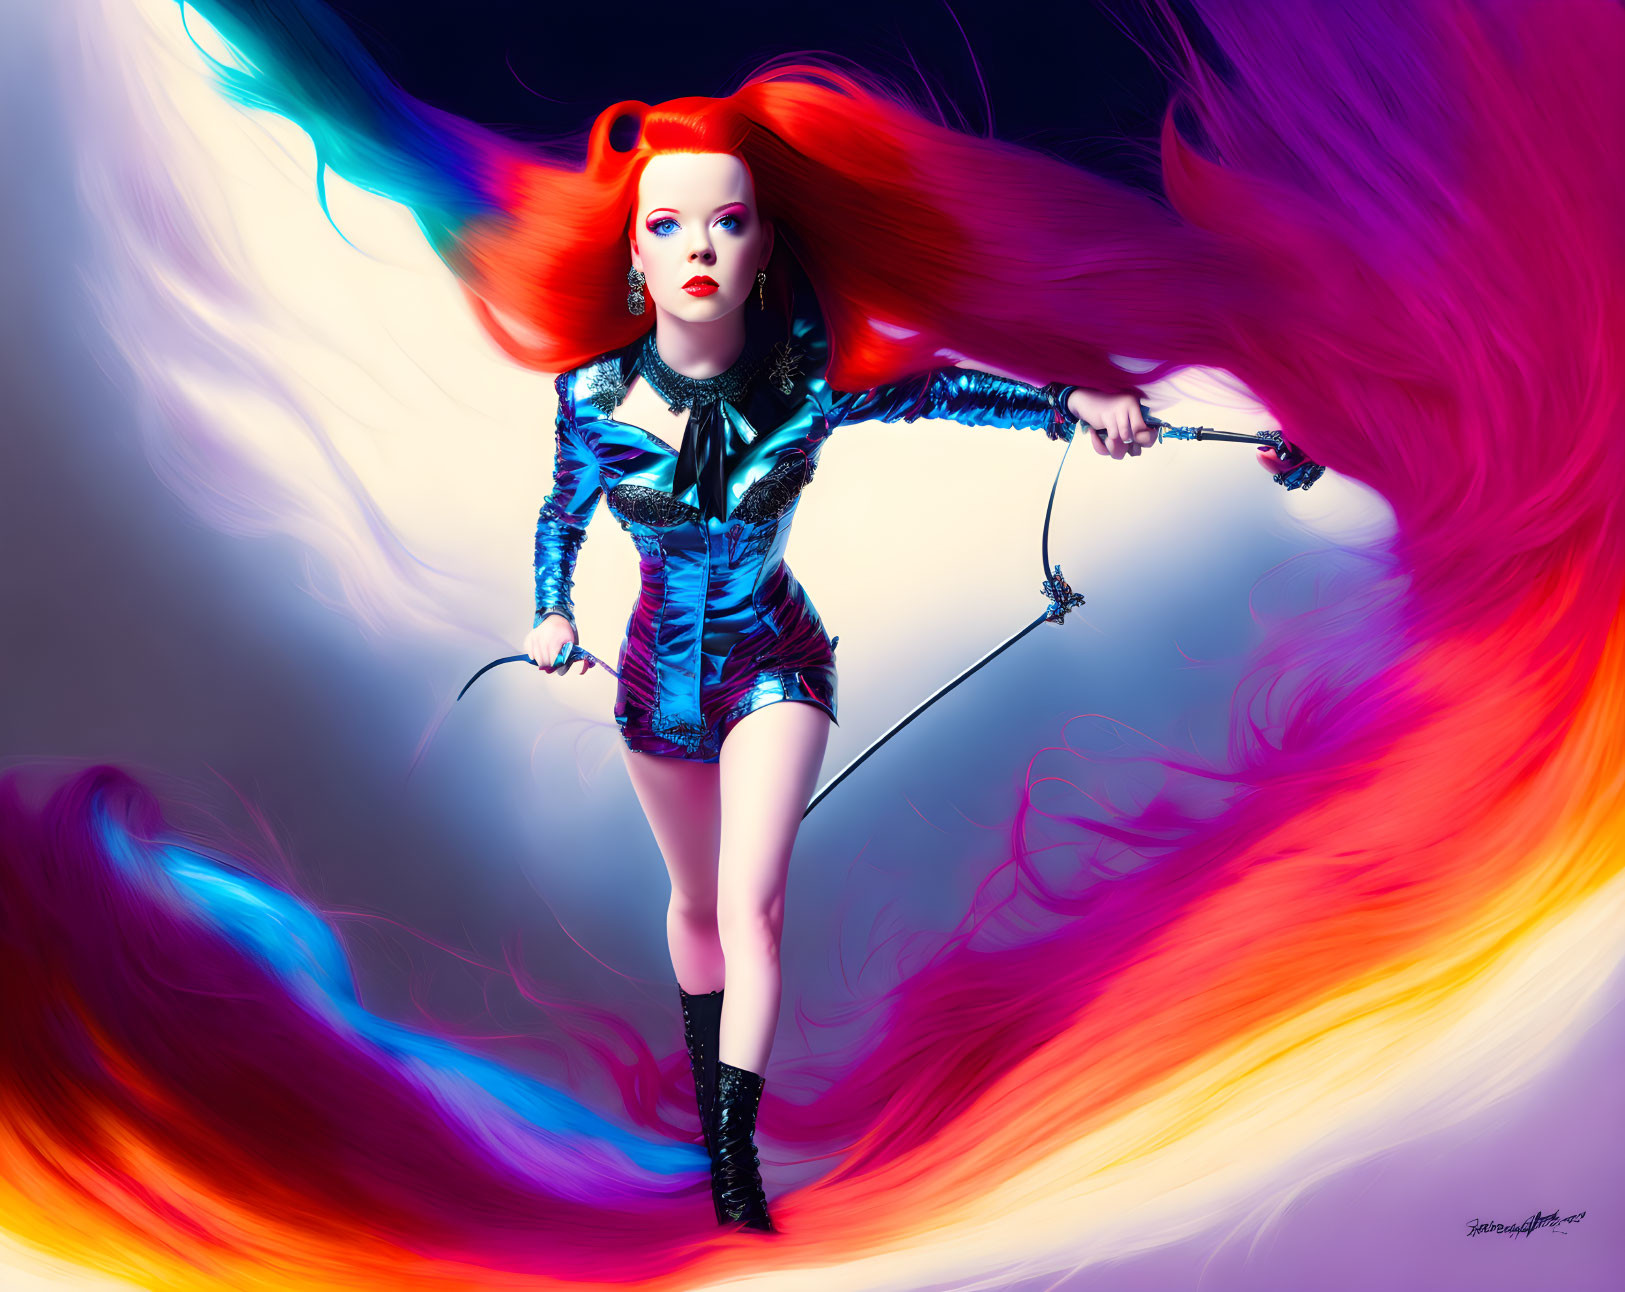 Colorful artwork: Woman with red hair in blue outfit amidst swirling colors